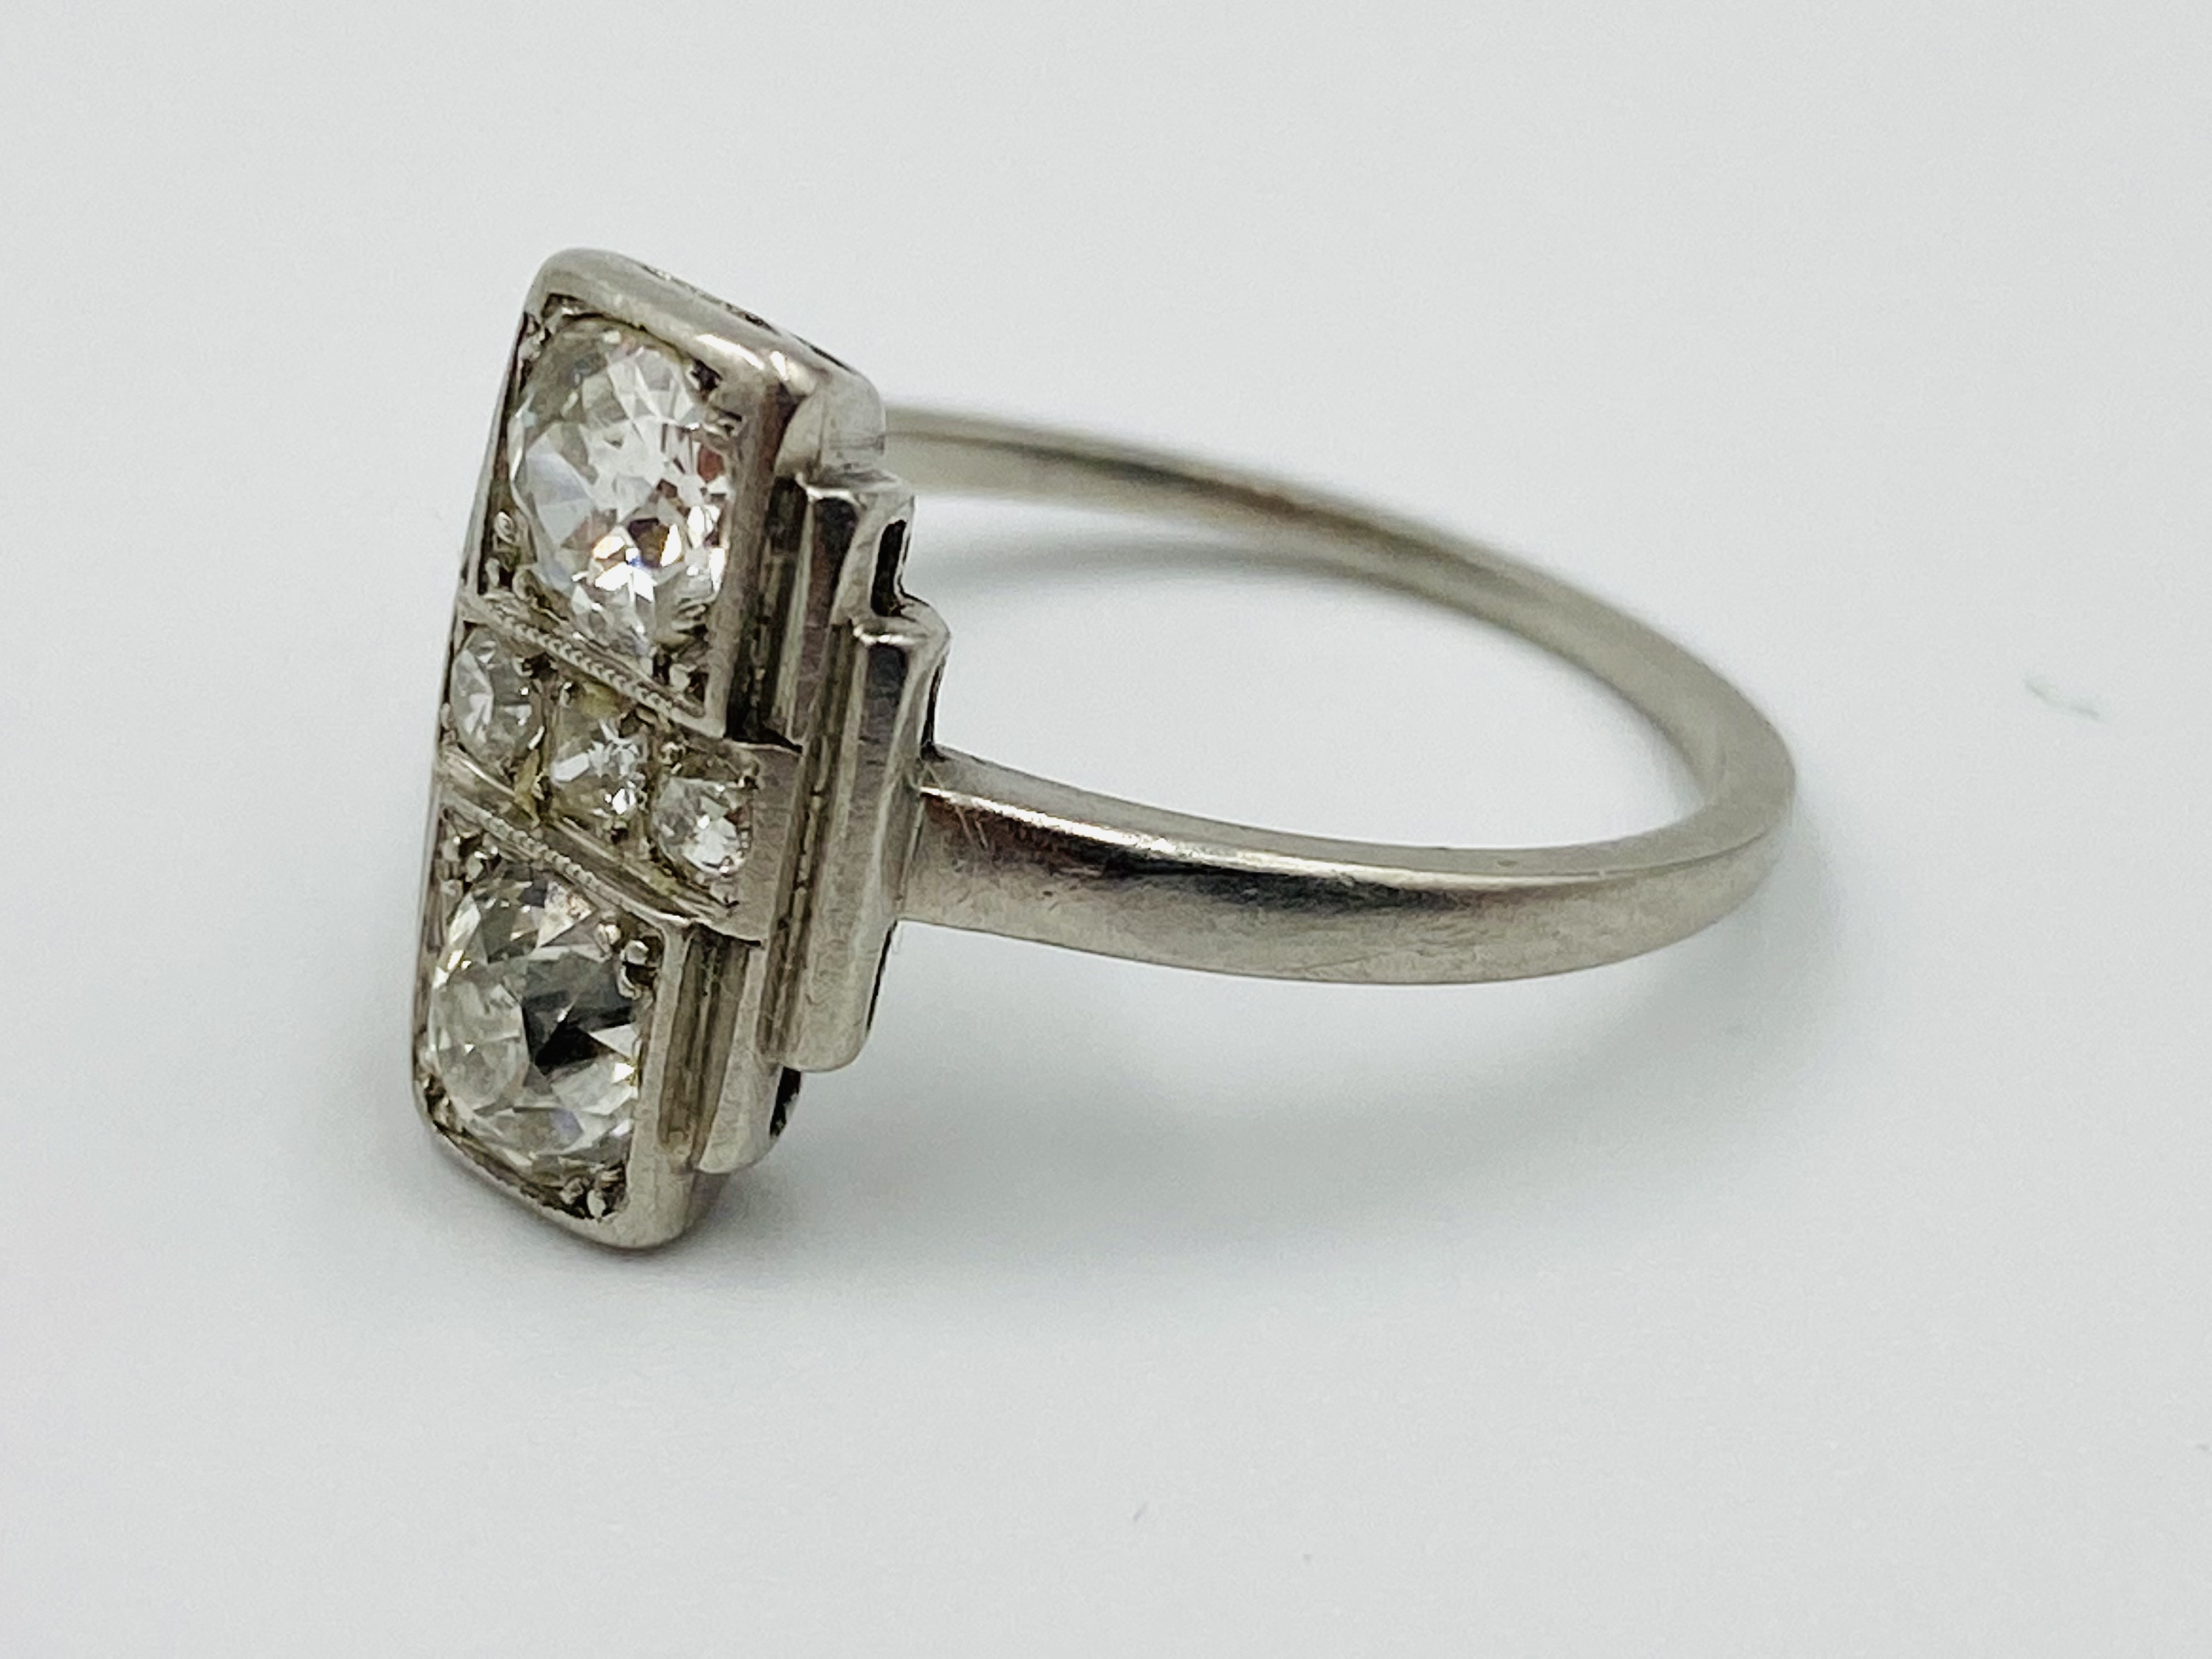 Art deco style platinum and diamond two stone ring - Image 2 of 6